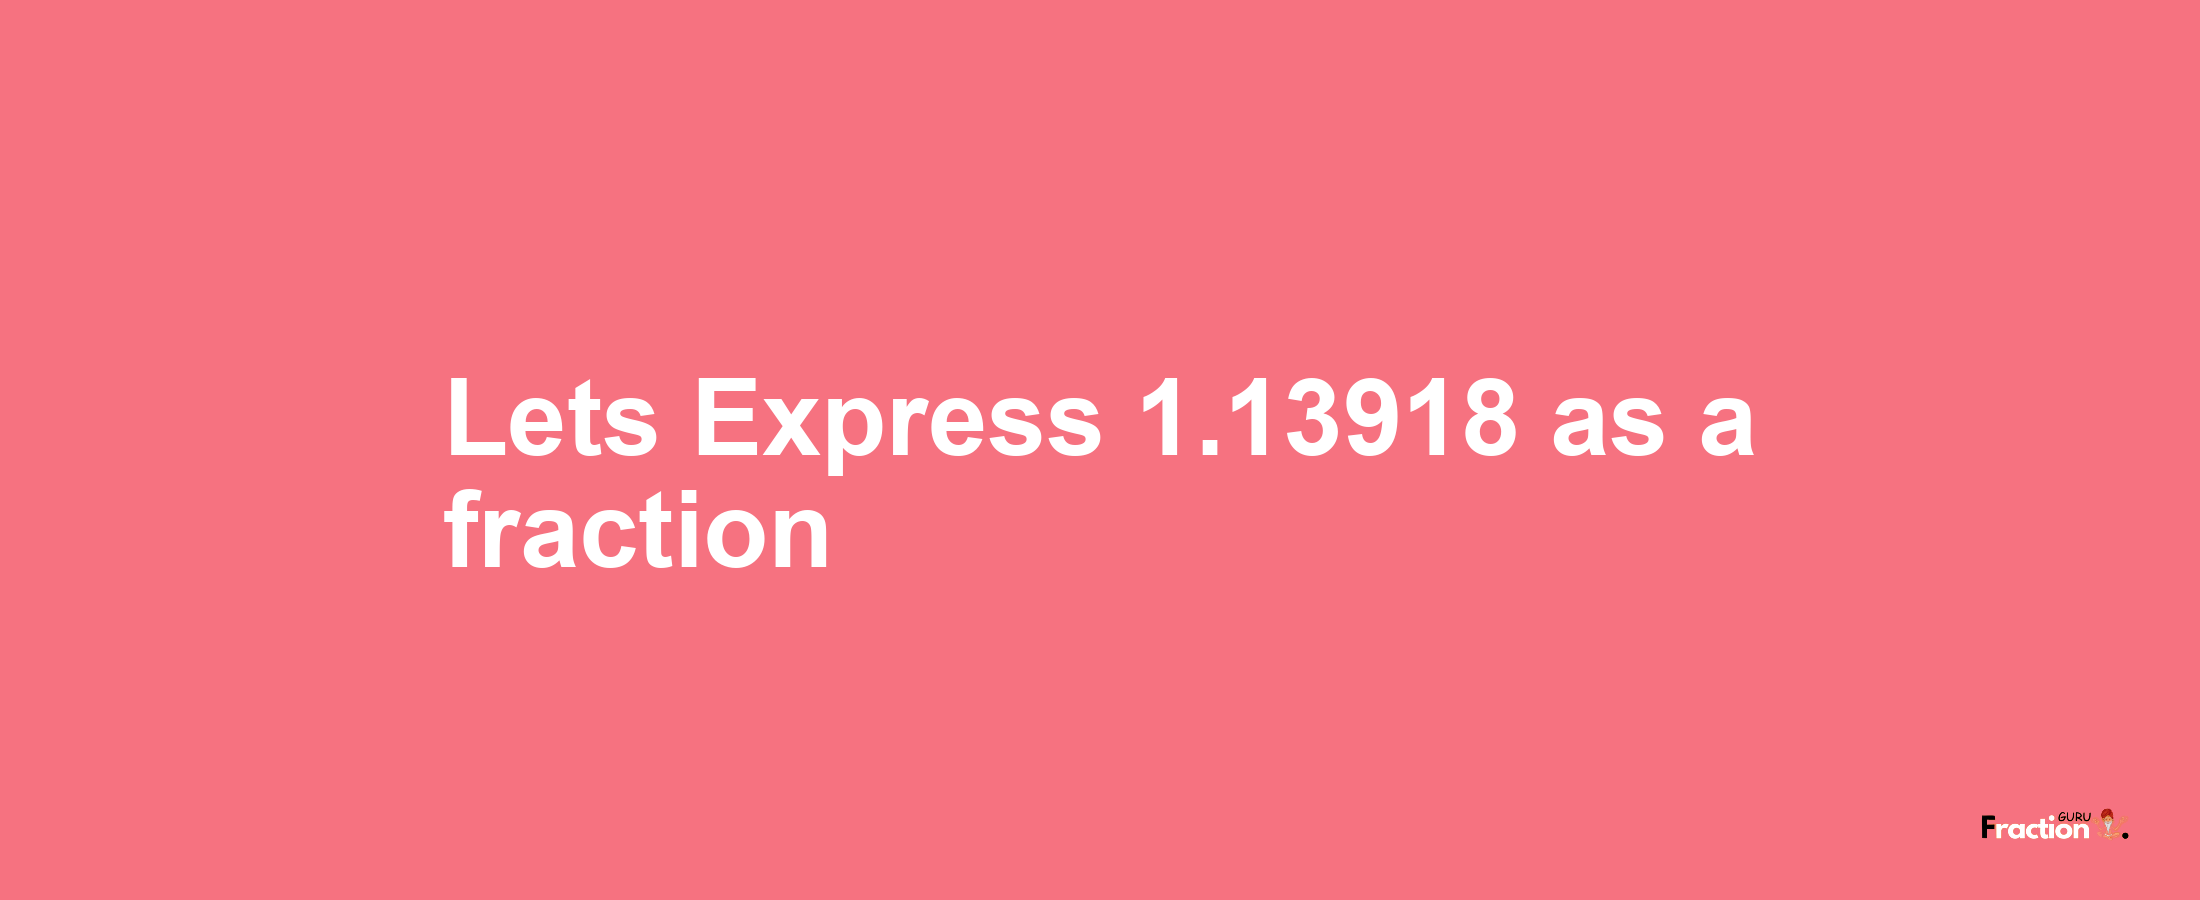 Lets Express 1.13918 as afraction